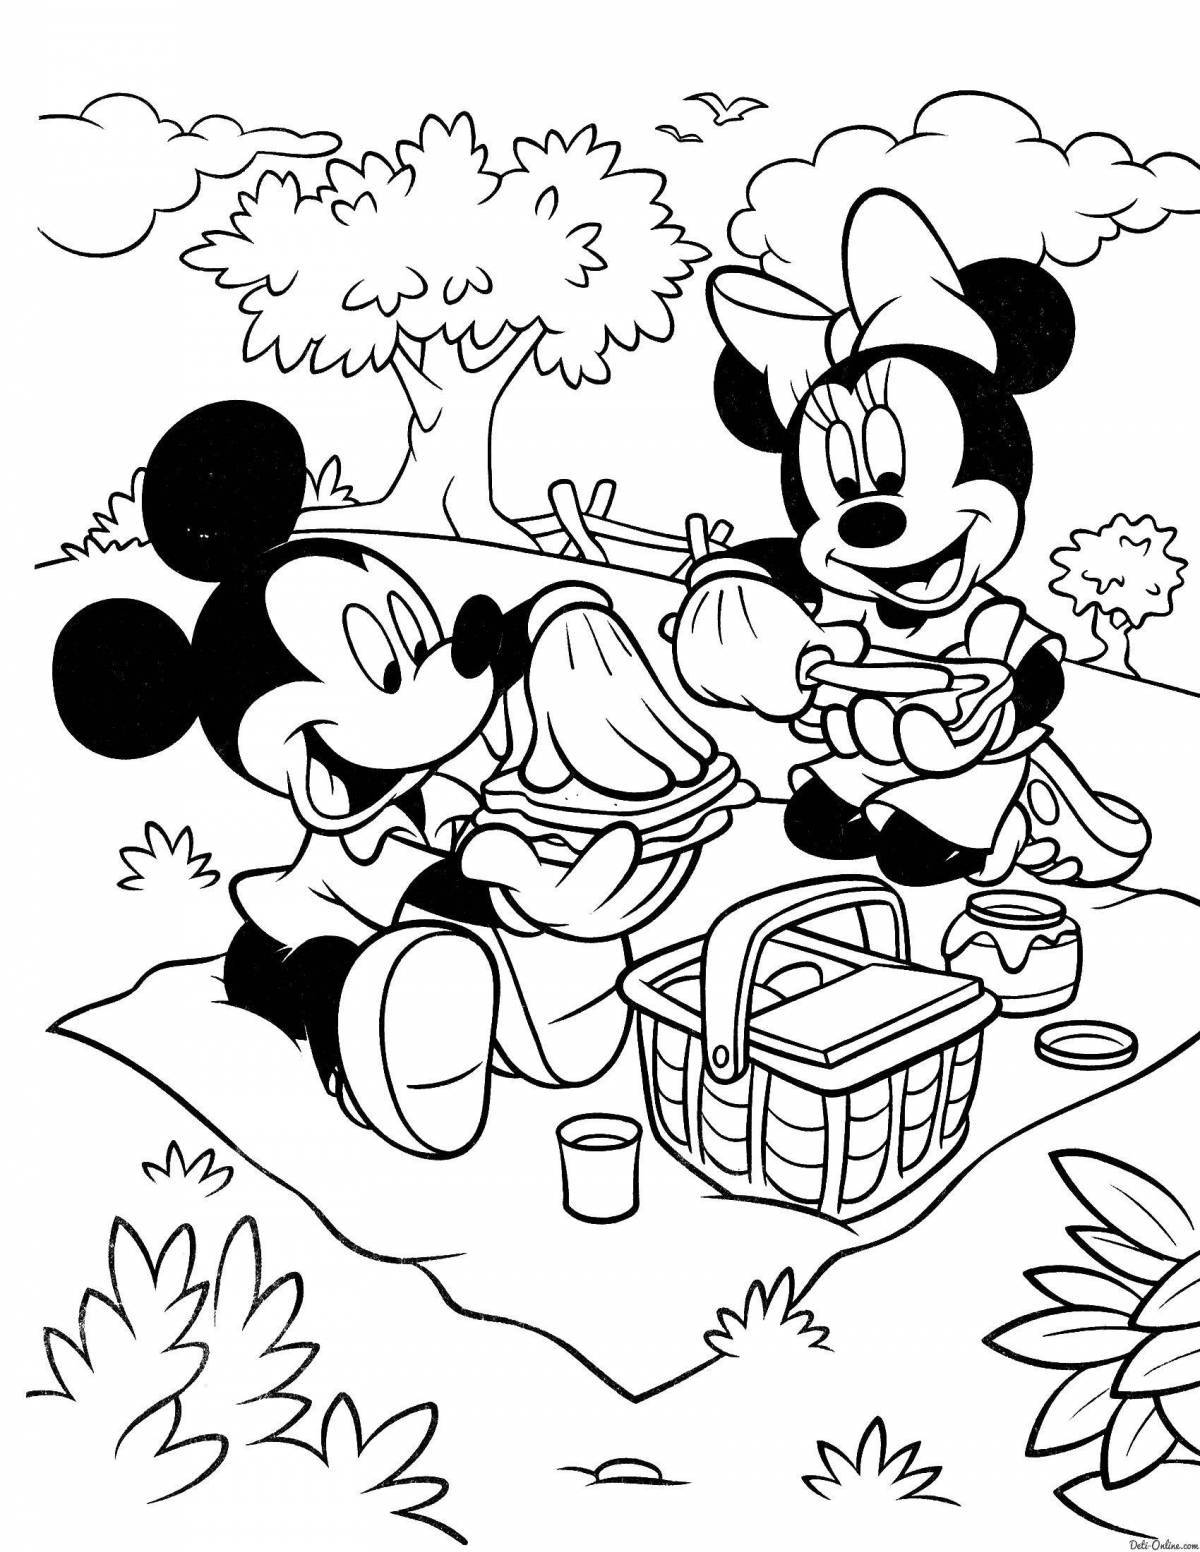 Bright mickey mouse coloring page